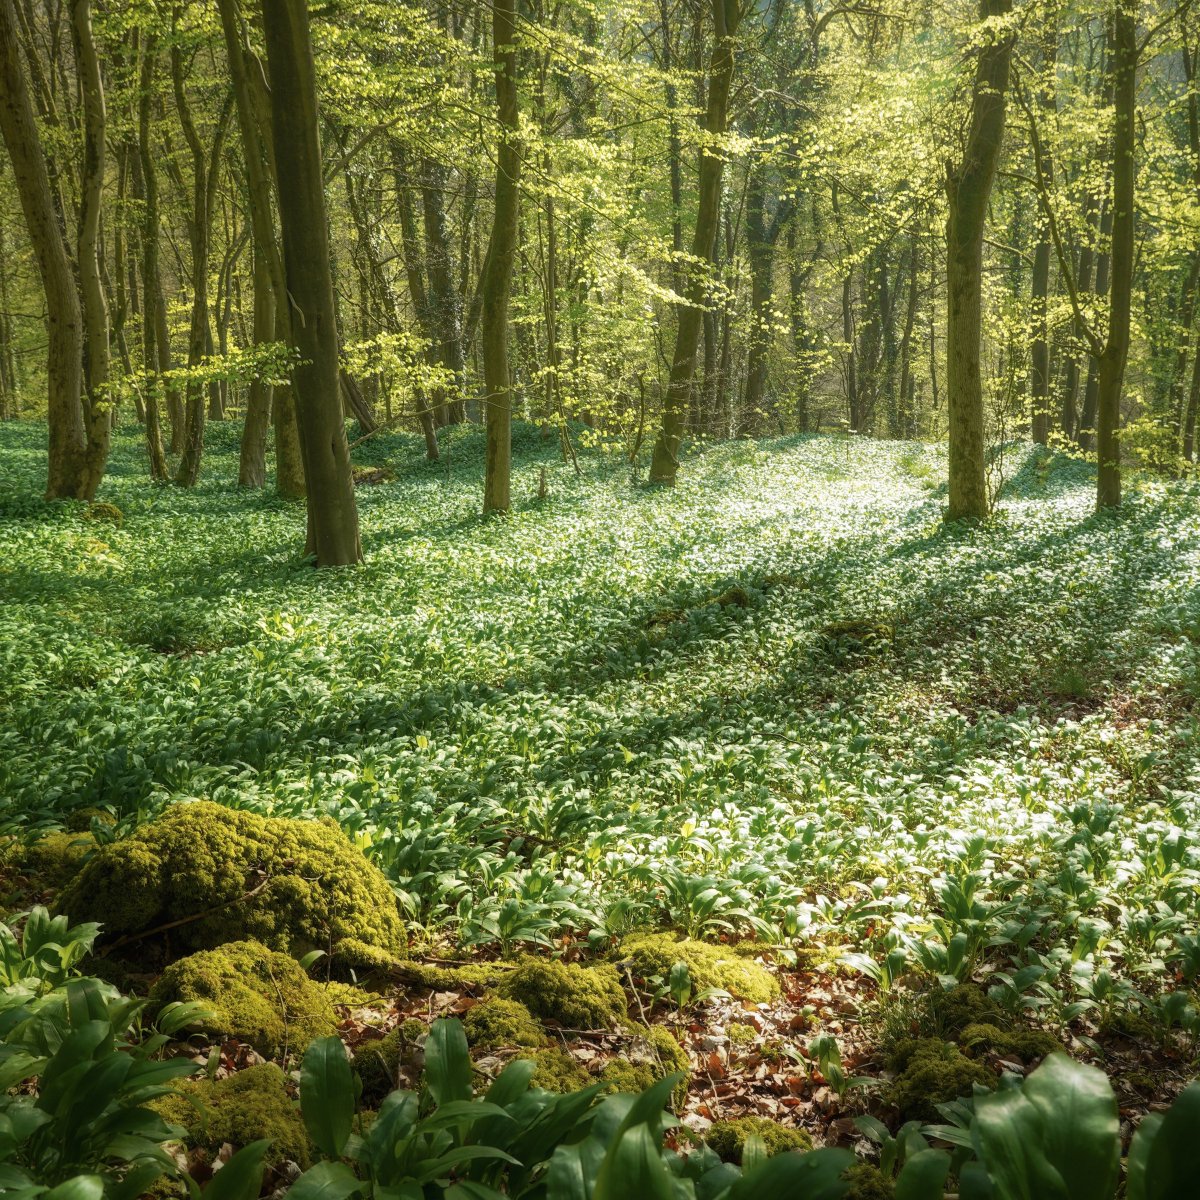 After so many months of brown and grey, it was sheer bliss to stand in this woodland full of birds and allow my starved eyes to soak up every shade and tone and light of green, from the fluorescent glow of brand new leaves to the damp softness of the old moss on the rocks.